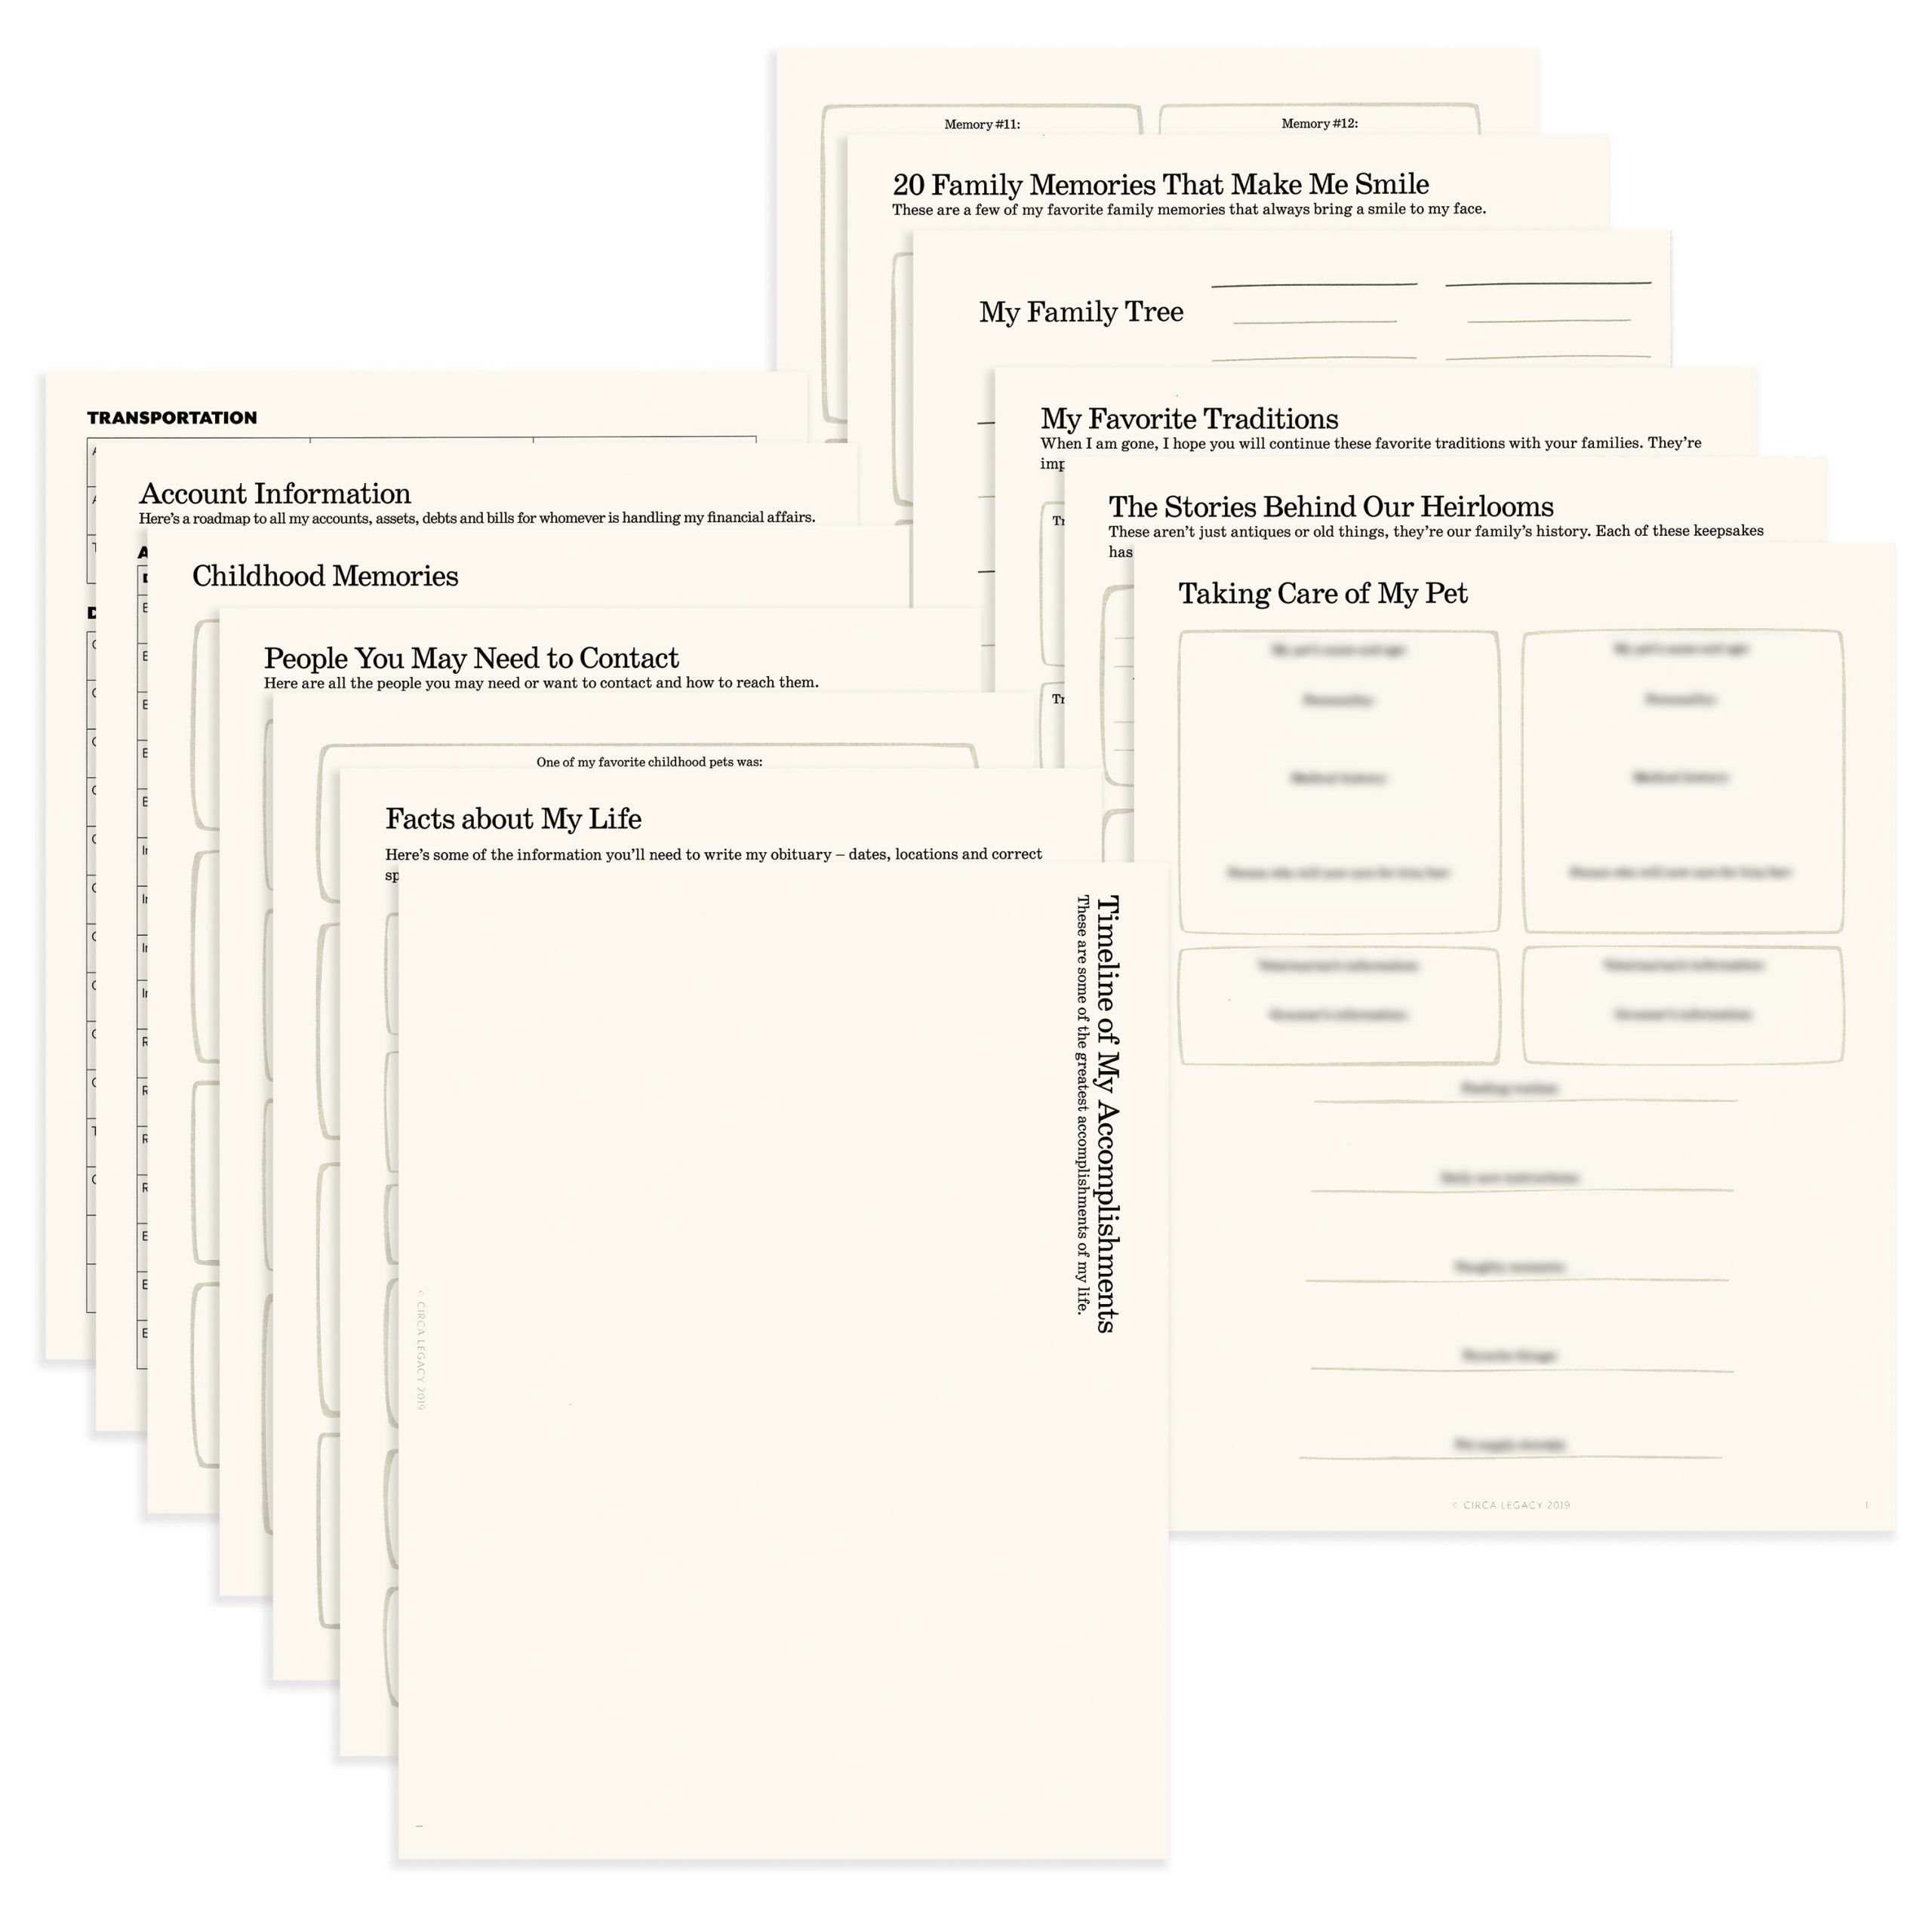 10 worksheets for the Things You Need to Know Kit created by Circa Legacy